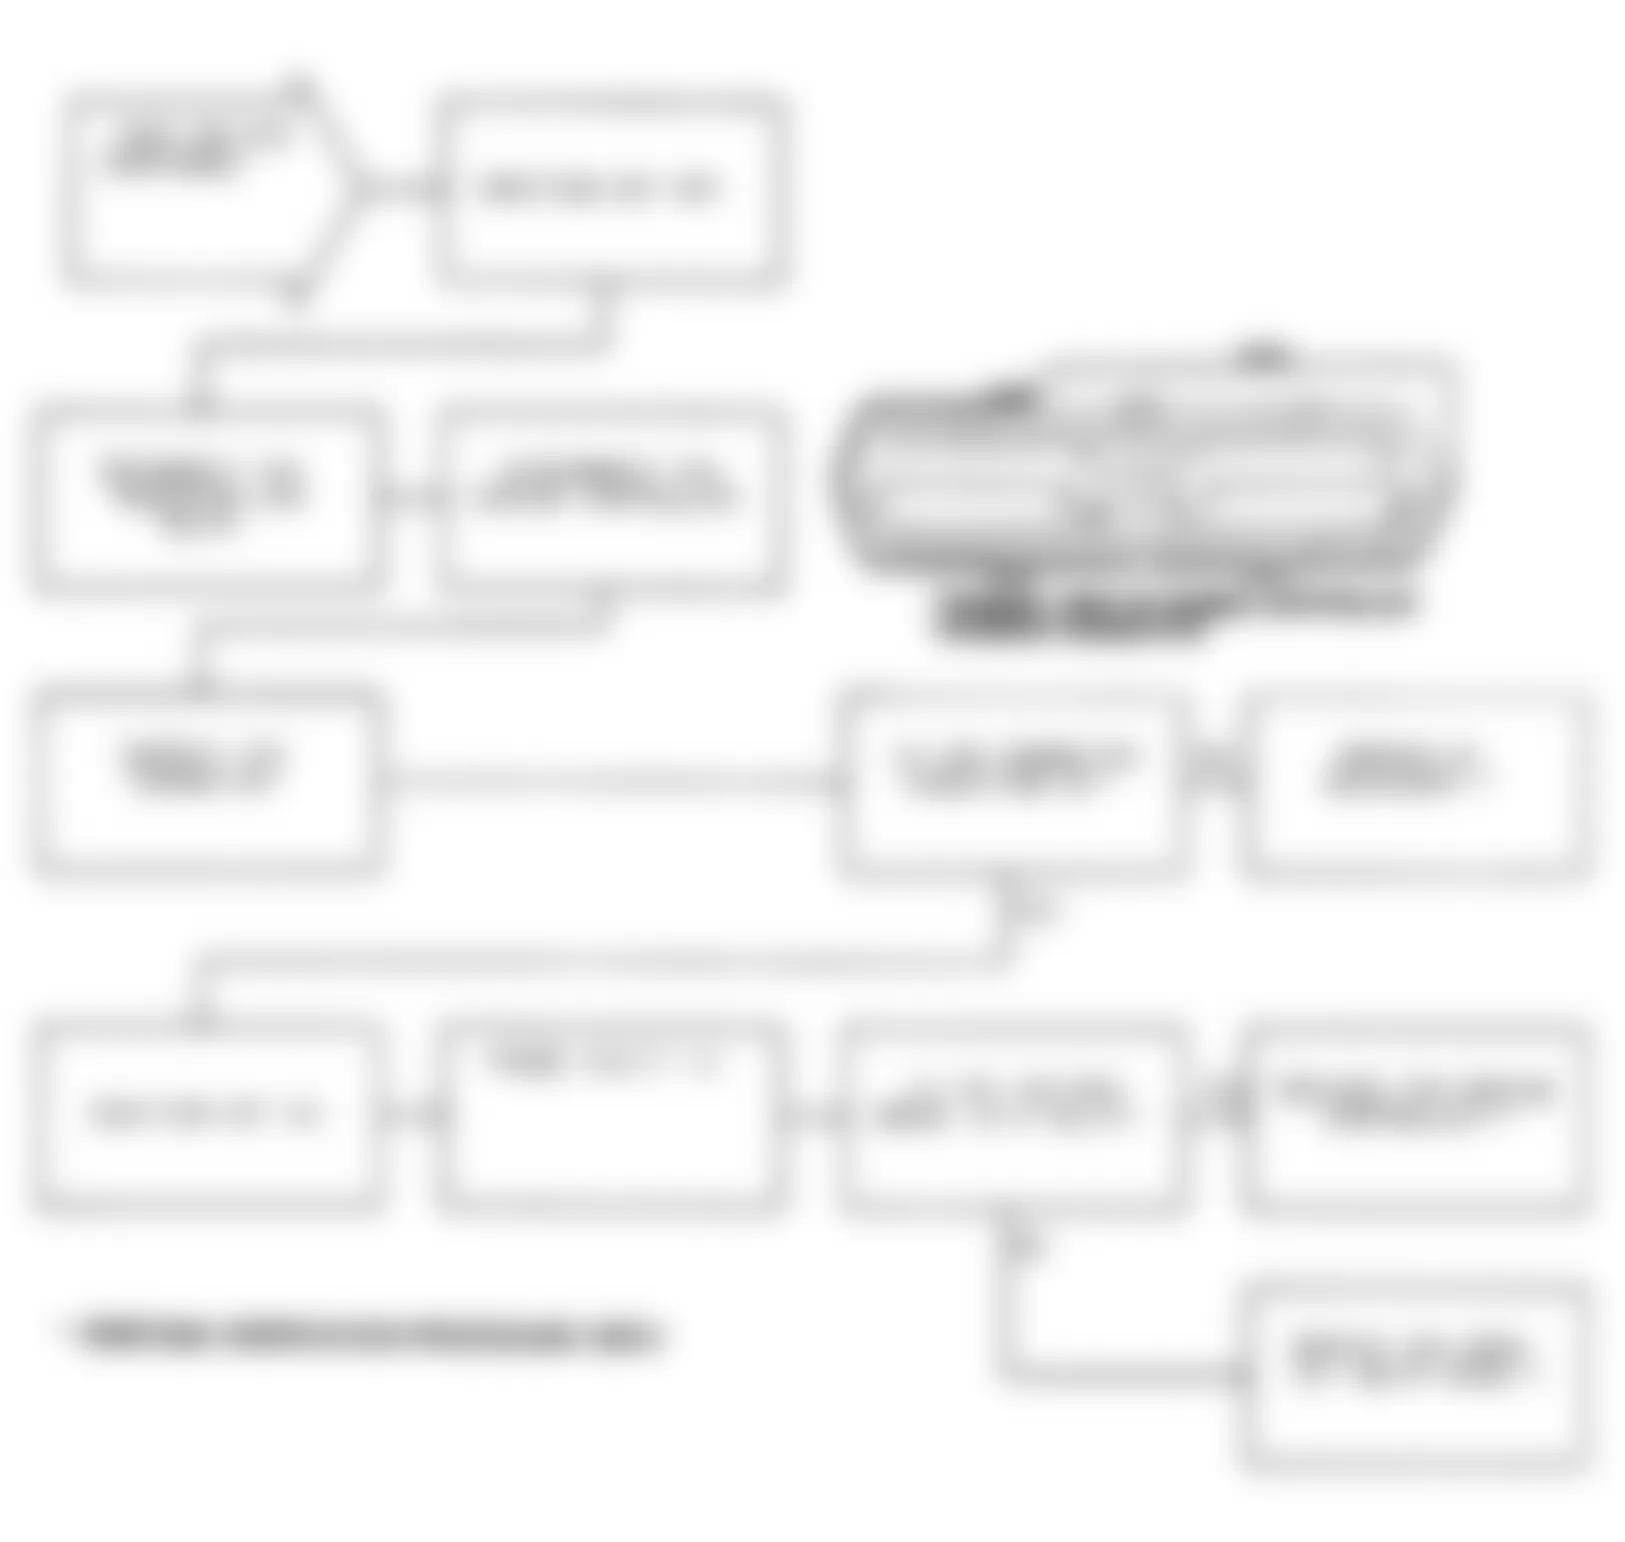 Chrysler New Yorker Salon 1991 - Component Locations -  Test DR-27A Code 35: Flowchart (2 of 2)